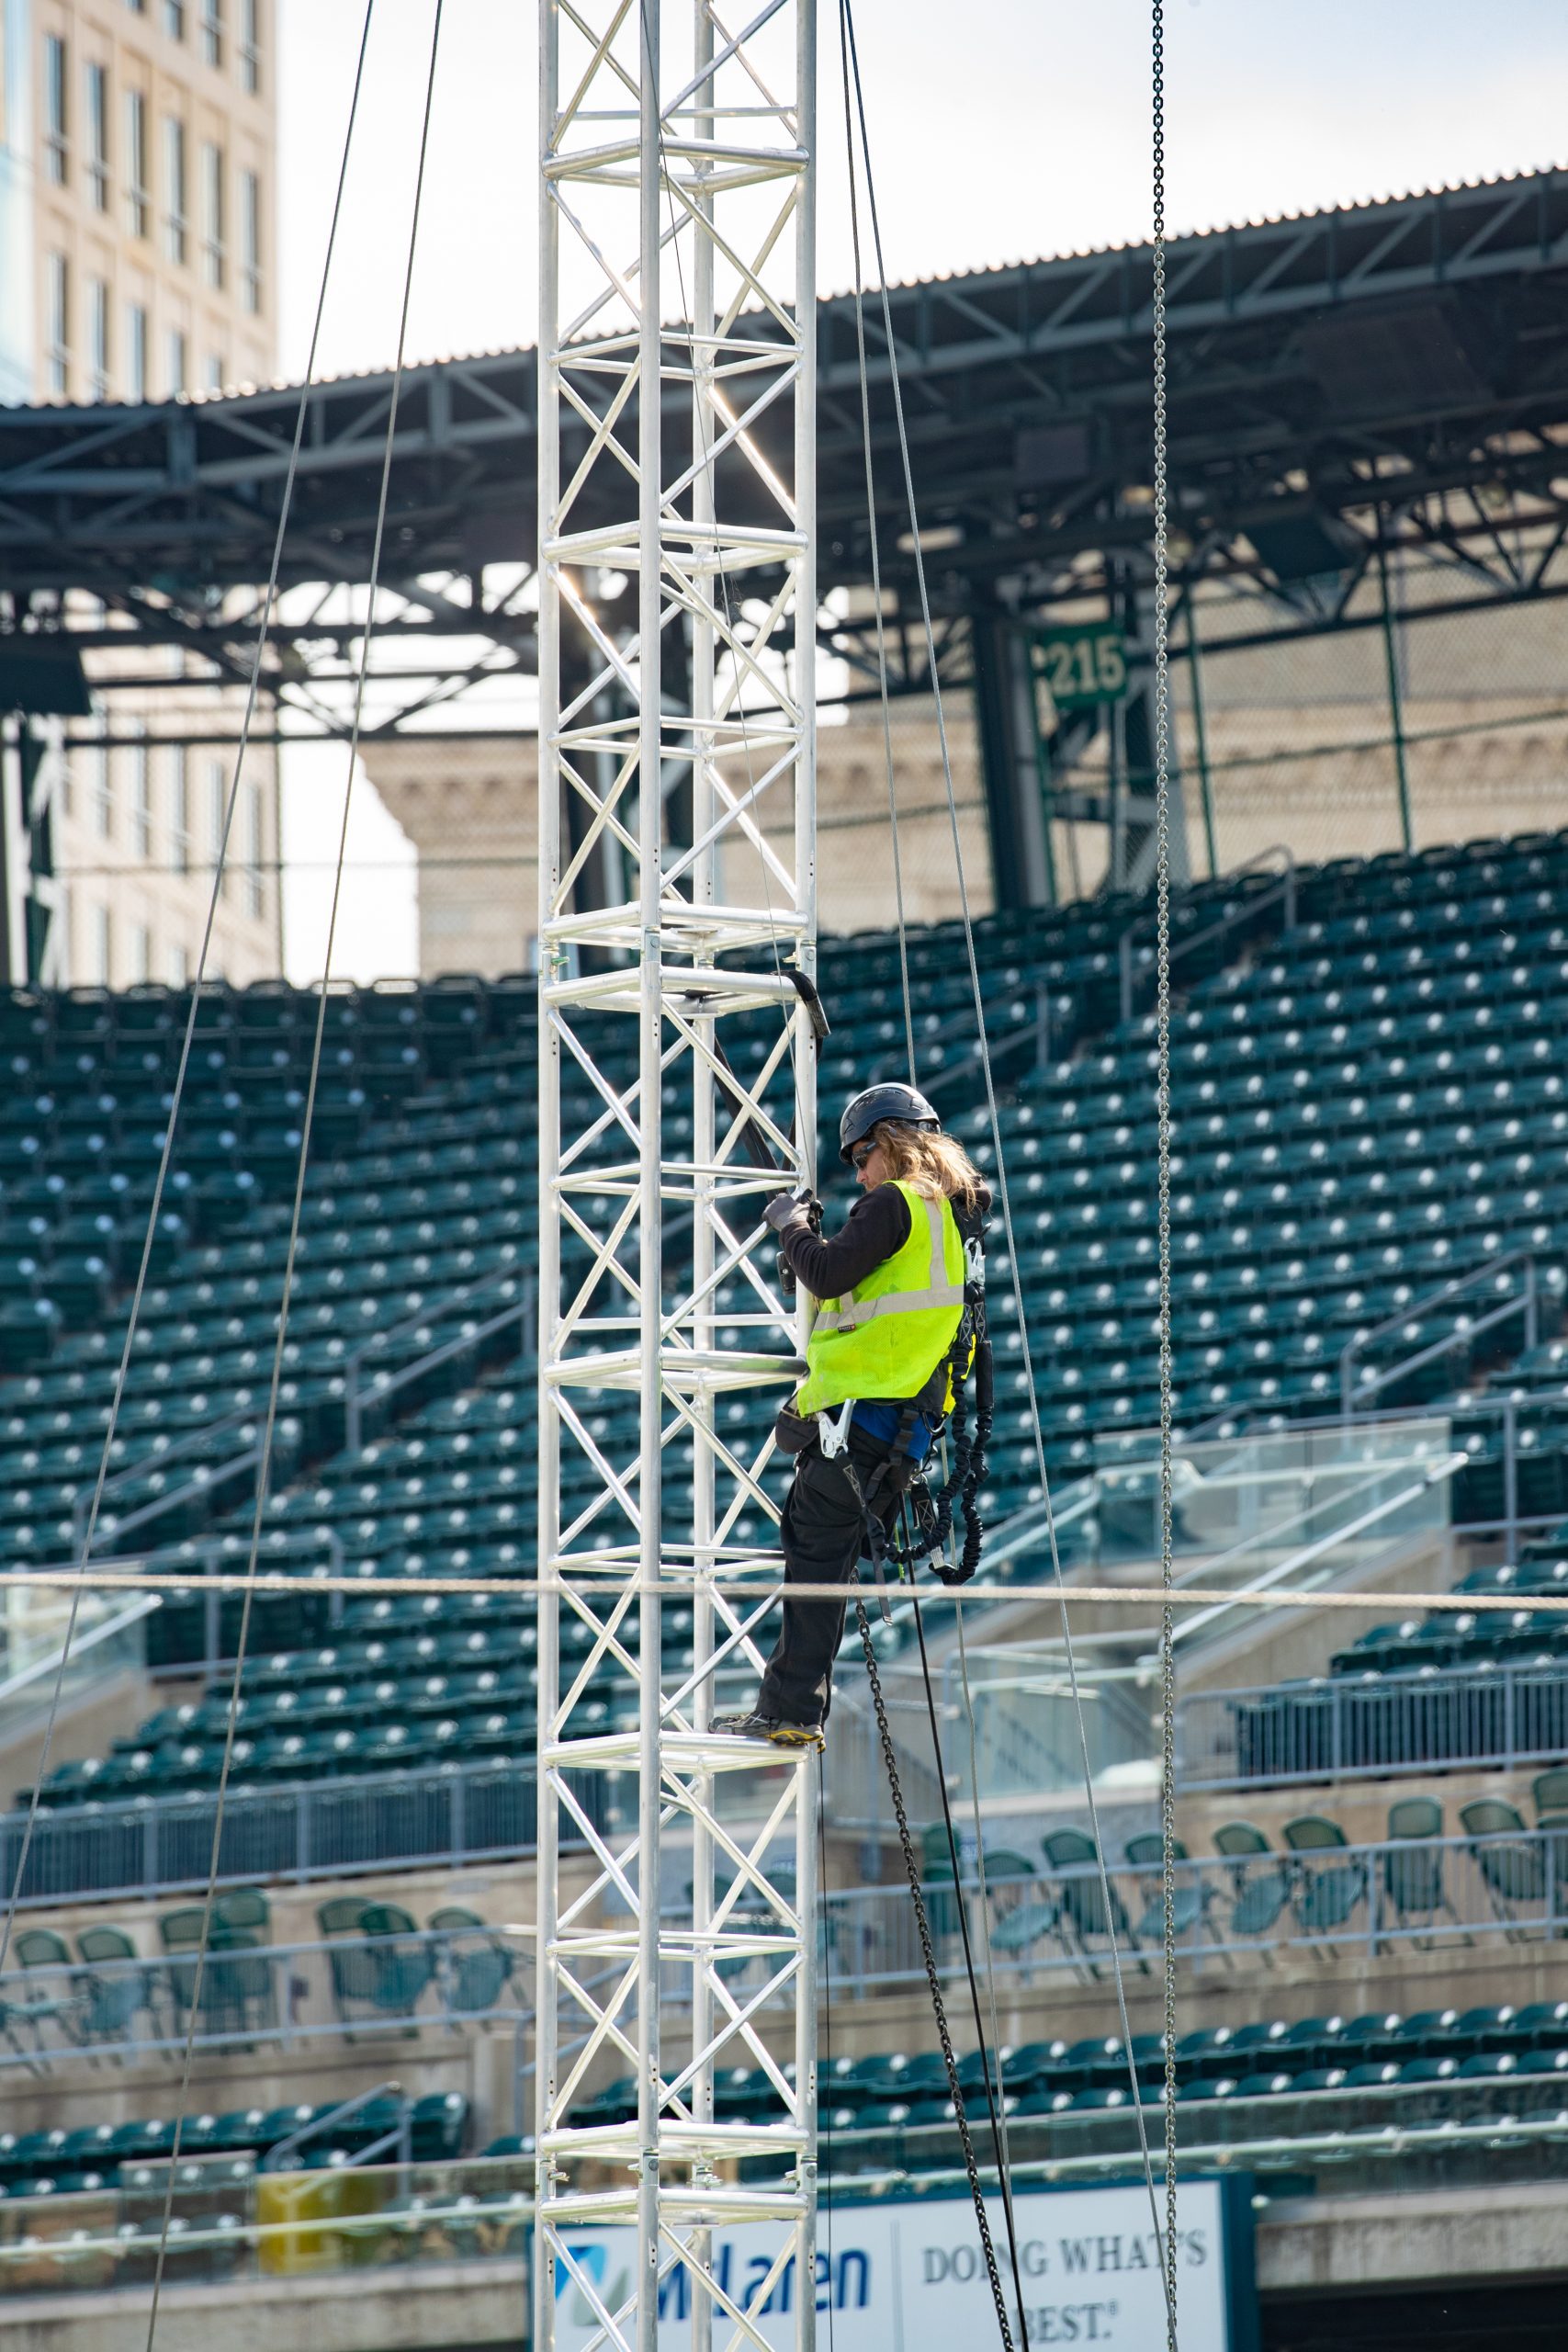 Comerica Park Transformed For Weekend of Concerts Ilitch Companies